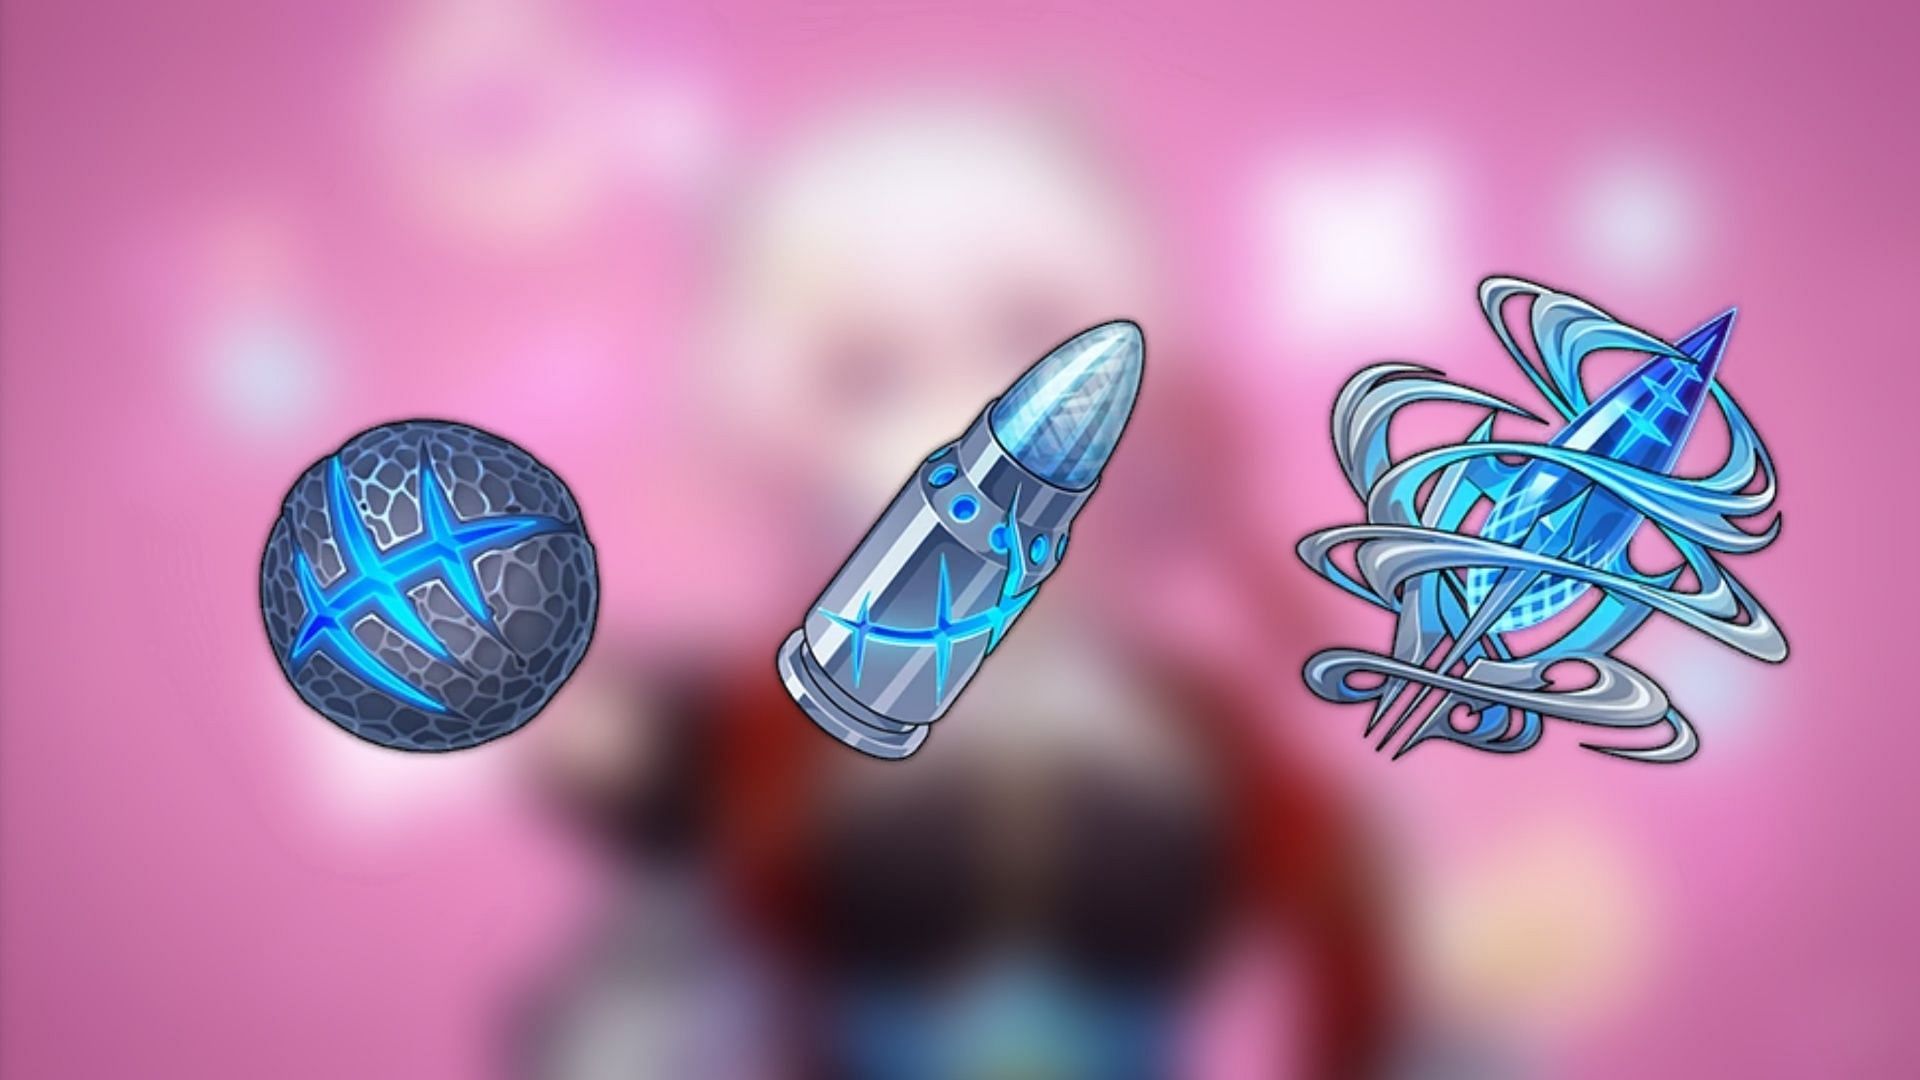 Meteoric Bullet, Destined Expiration, and Countertemporal Shot (Image via HoYoverse)